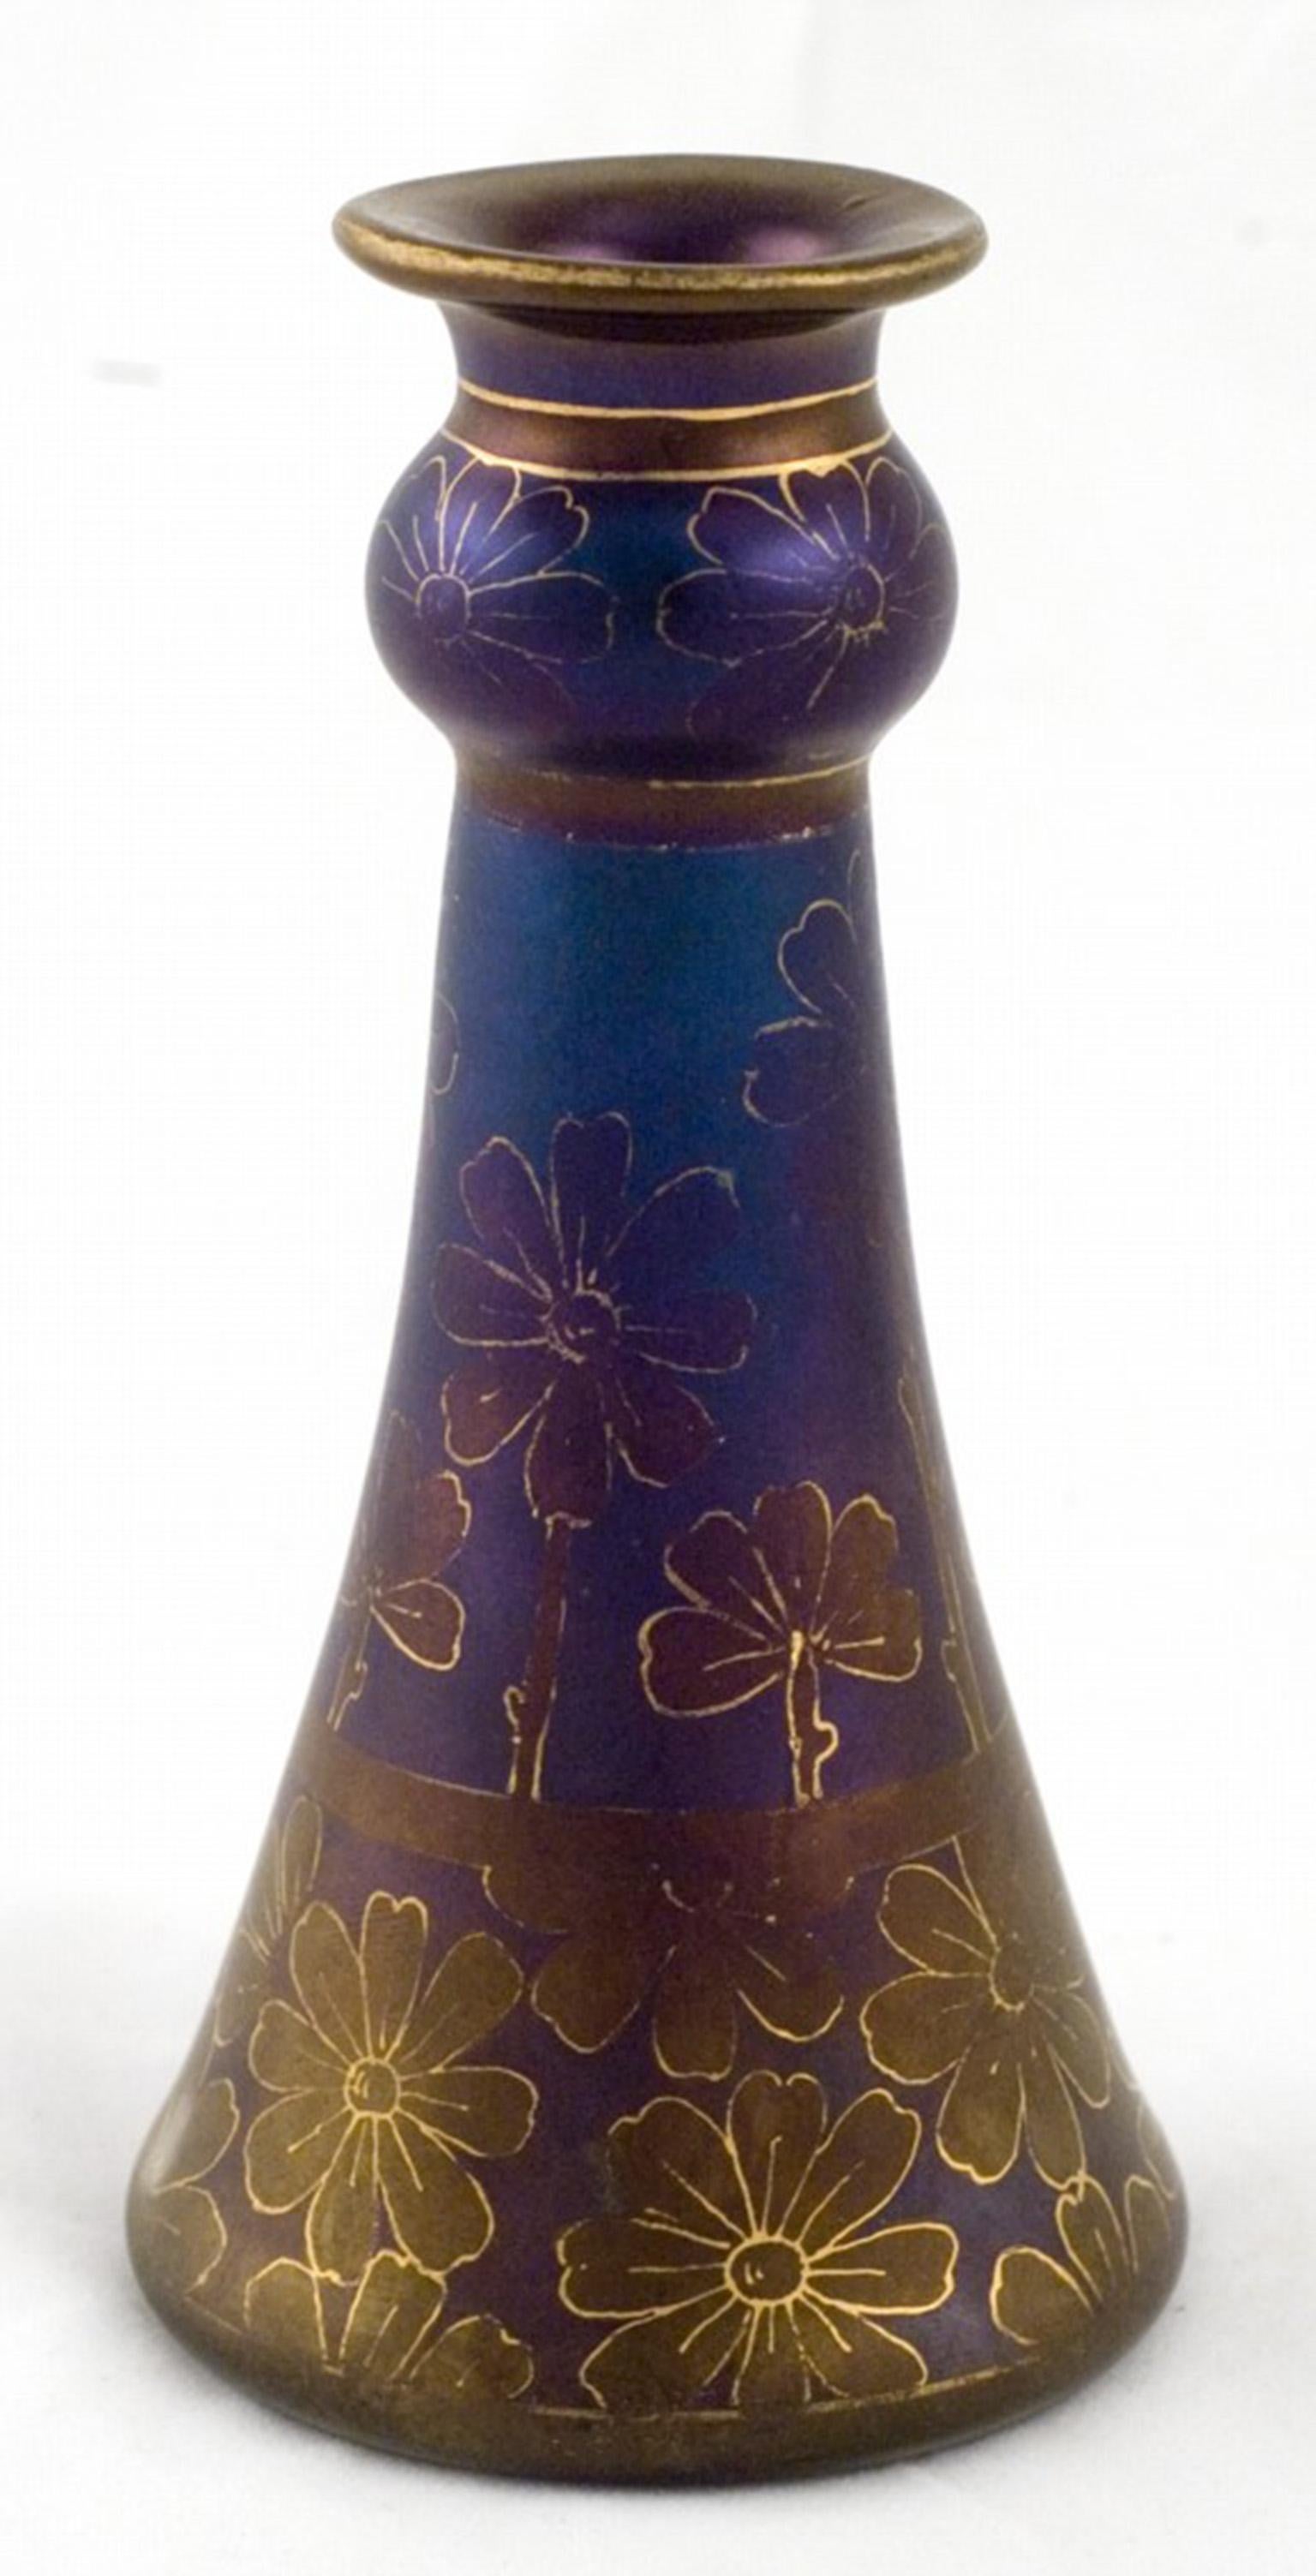 Small Vase Johann Loetz Witwe blue purple flowers freehand and reduced blown glass I/116 decoration colored with etching ink and gold ca. 1900 marked remains of adhesive label

This compelling vase is categorized as a so-called “etched vase”. The